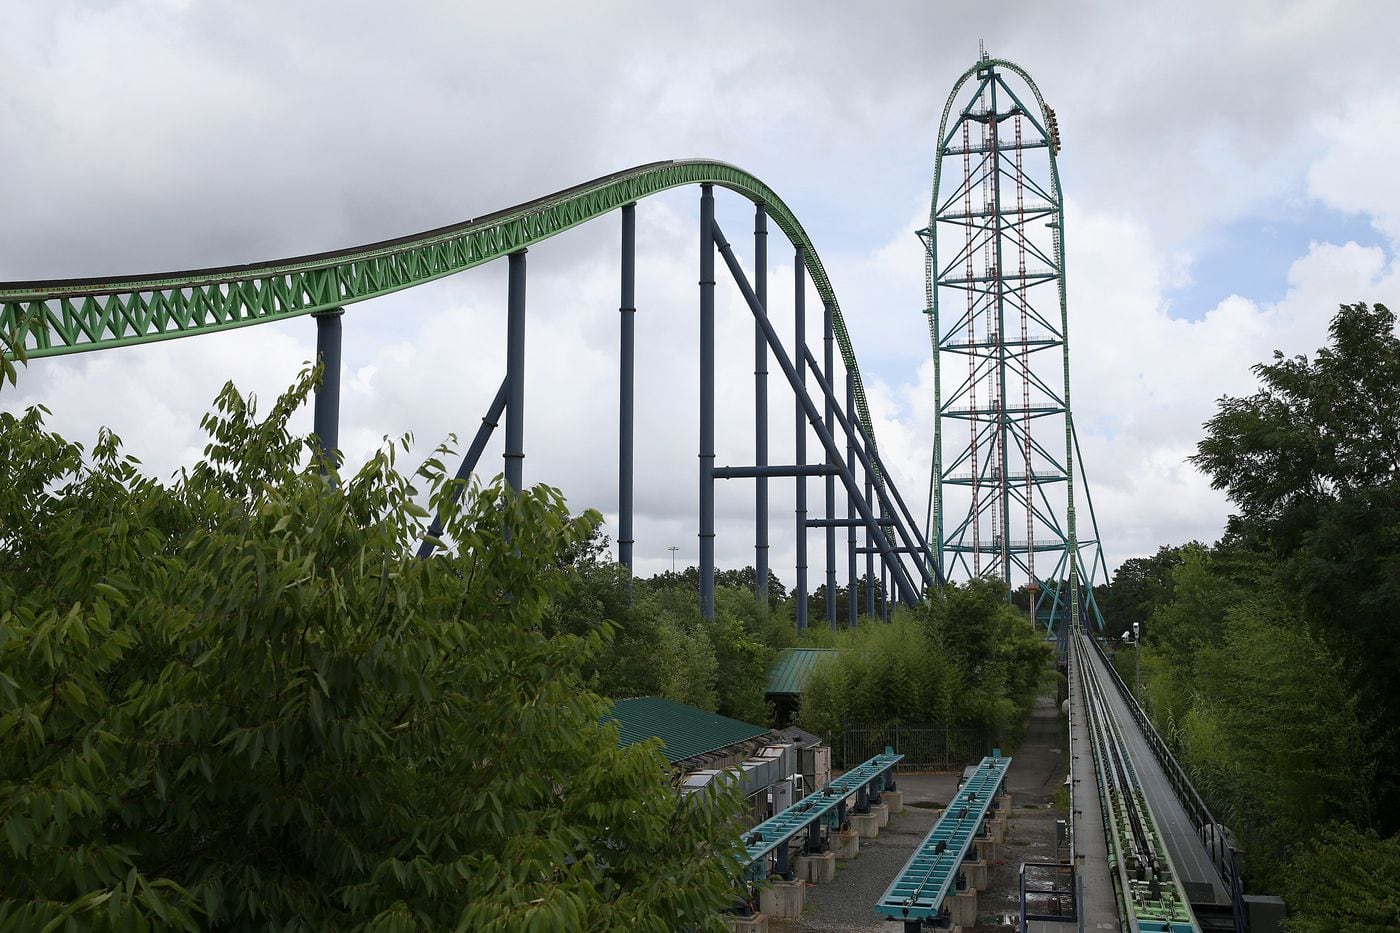 The Kingda Ka roller-coaster at Six Flags Great Adventure. At 456 feet tall, it is the tallest roller coaster in the world.